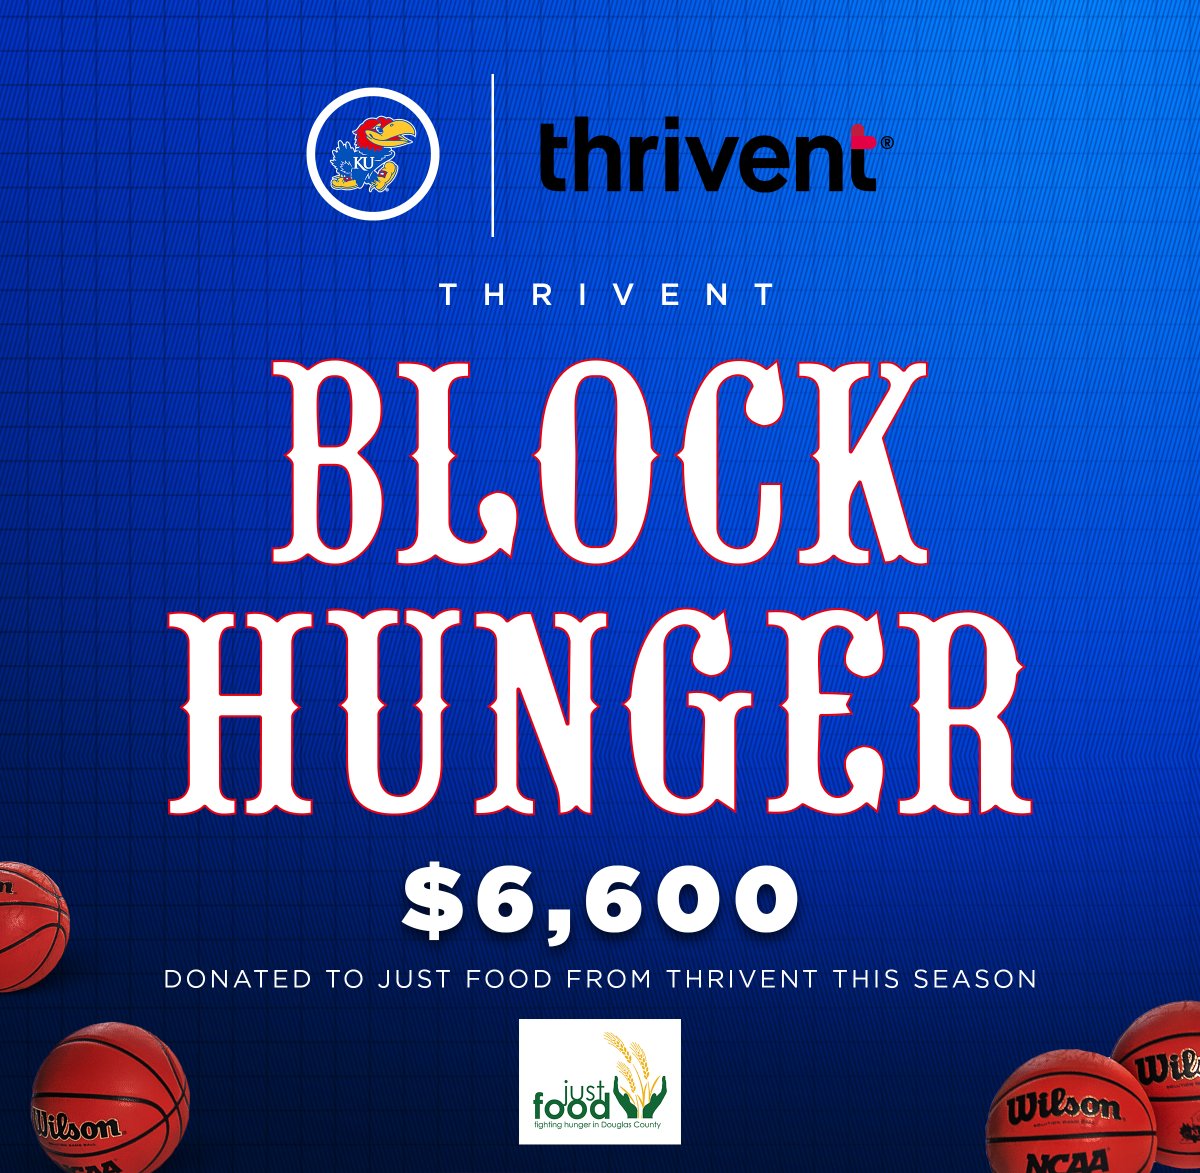 For every block recorded by @kuhoops and @kuwbball this season, @Thrivent donated to Just Food of Douglas County for a total of $6,600 🏀 #RockChalk x #BlockHunger